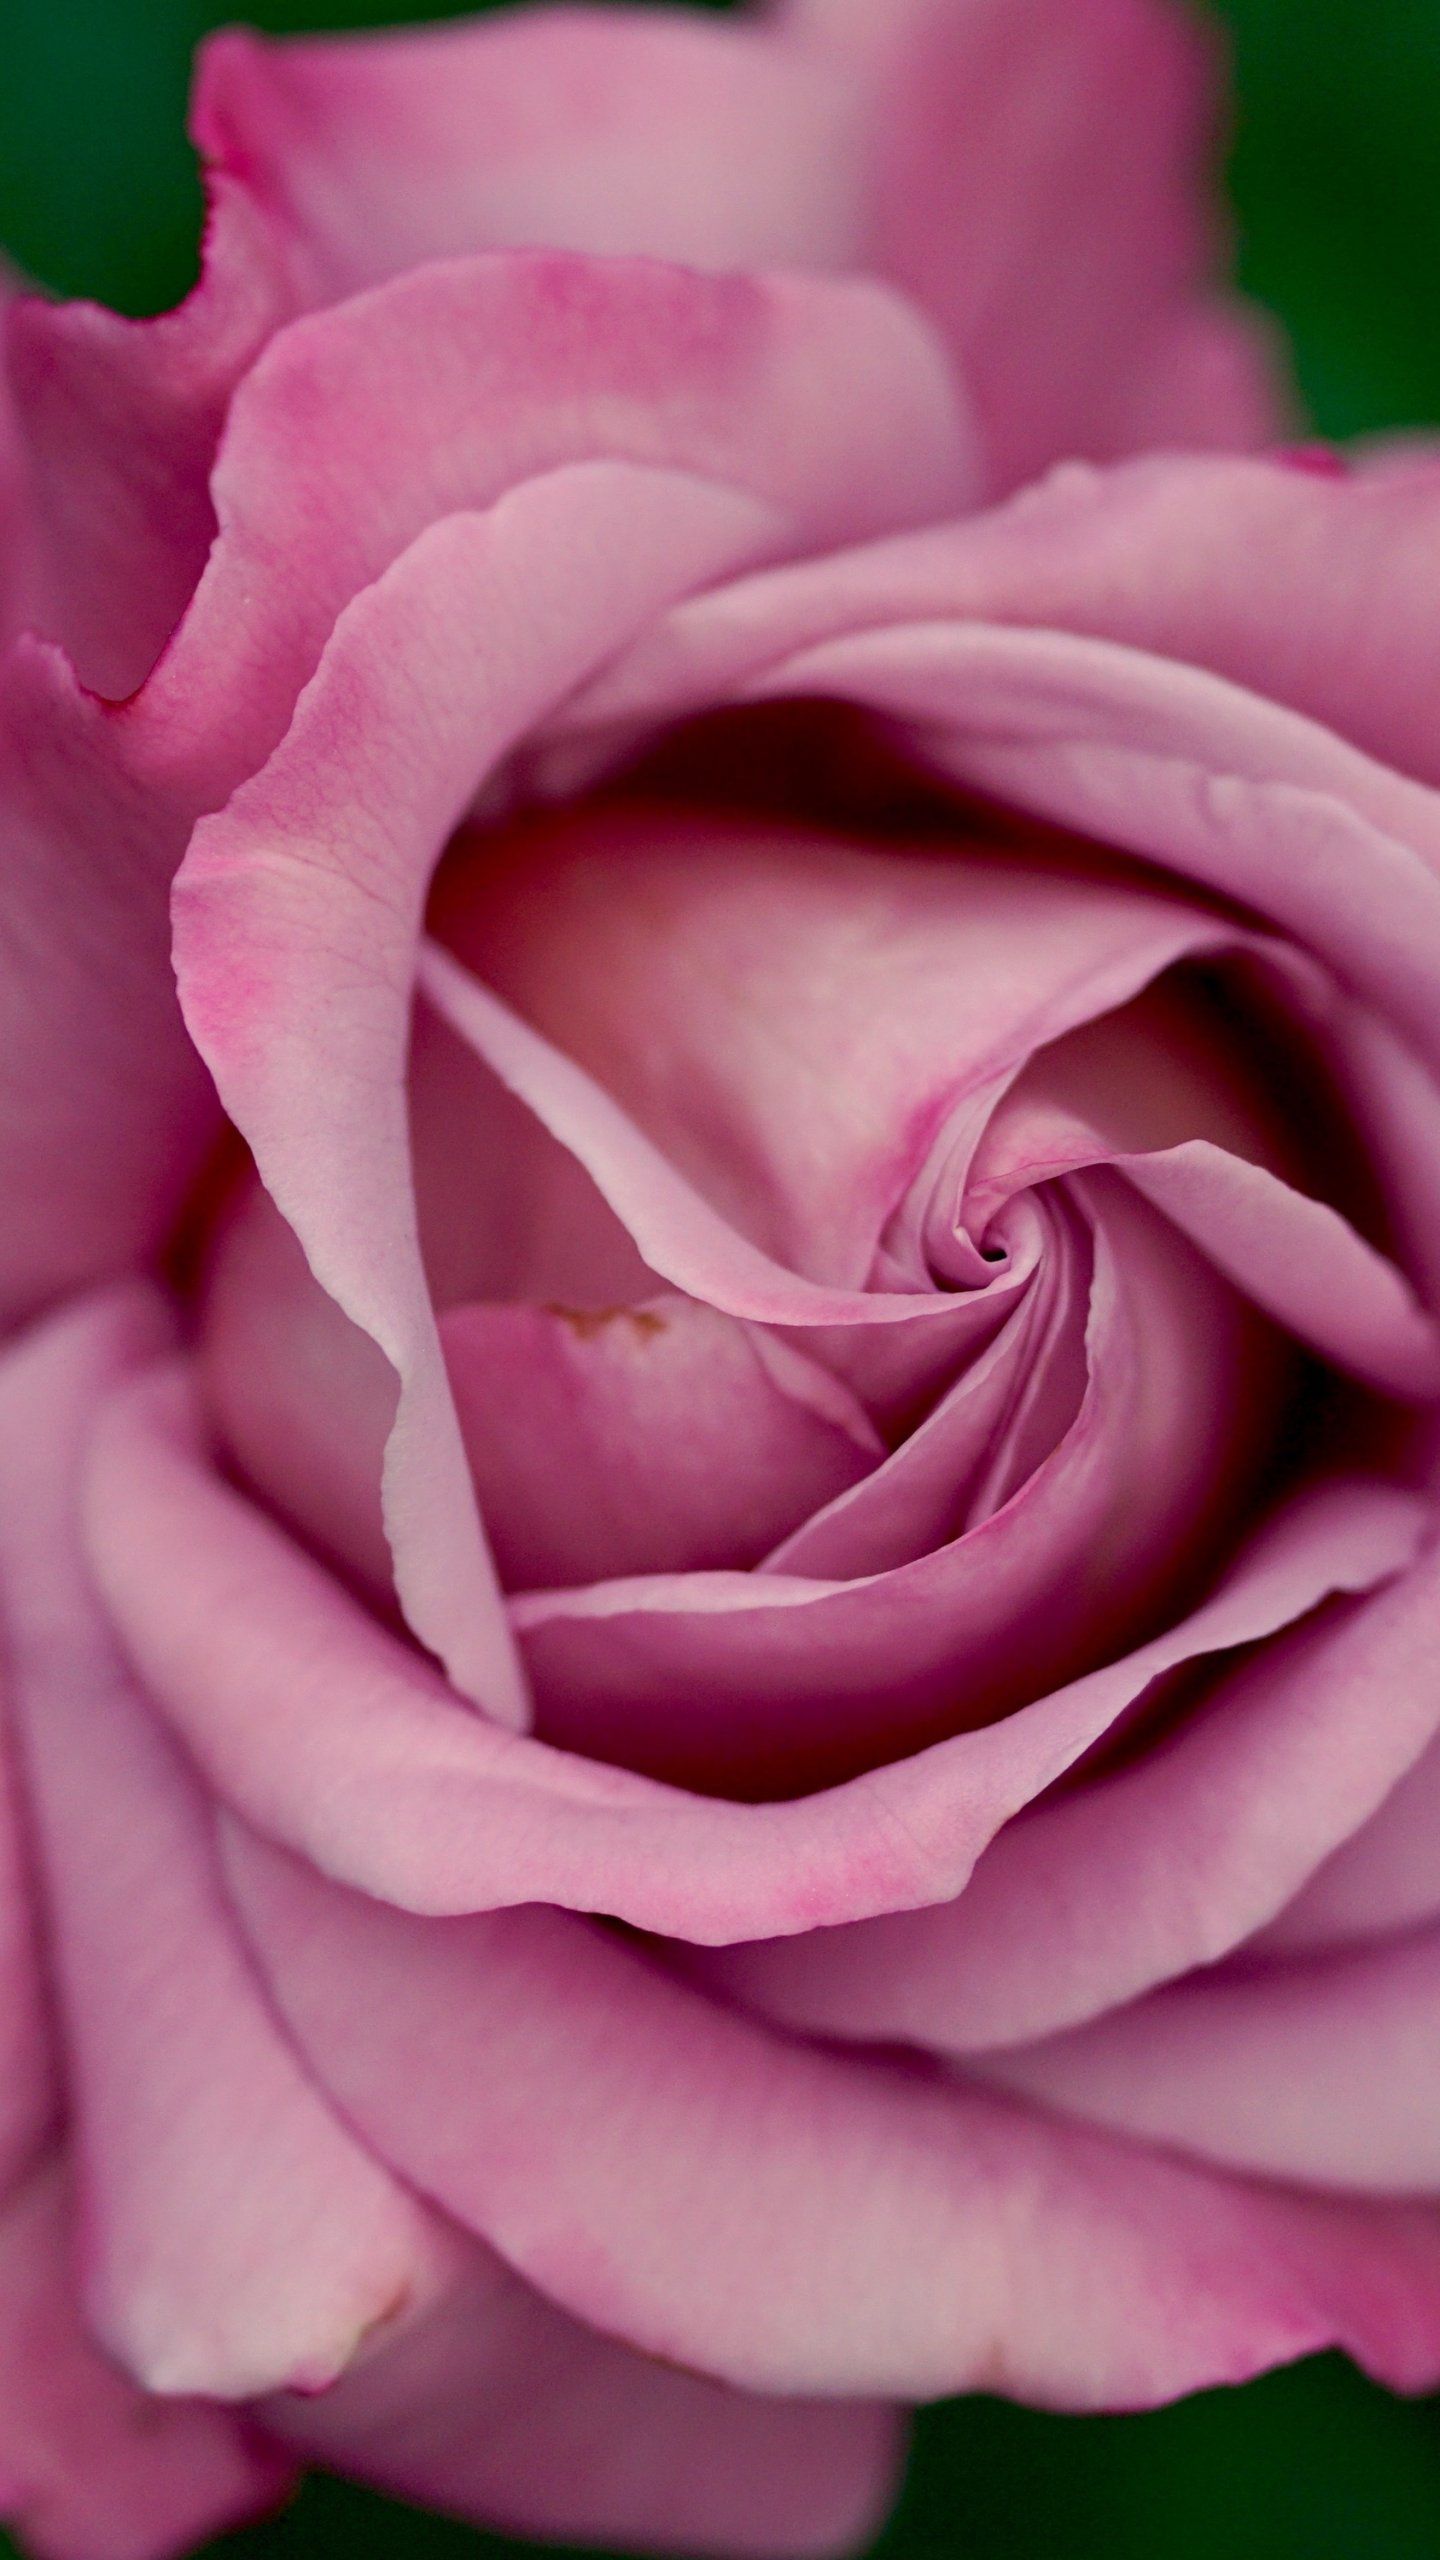 Dusty Pink Rose Wallpaper, Android & Desktop Background